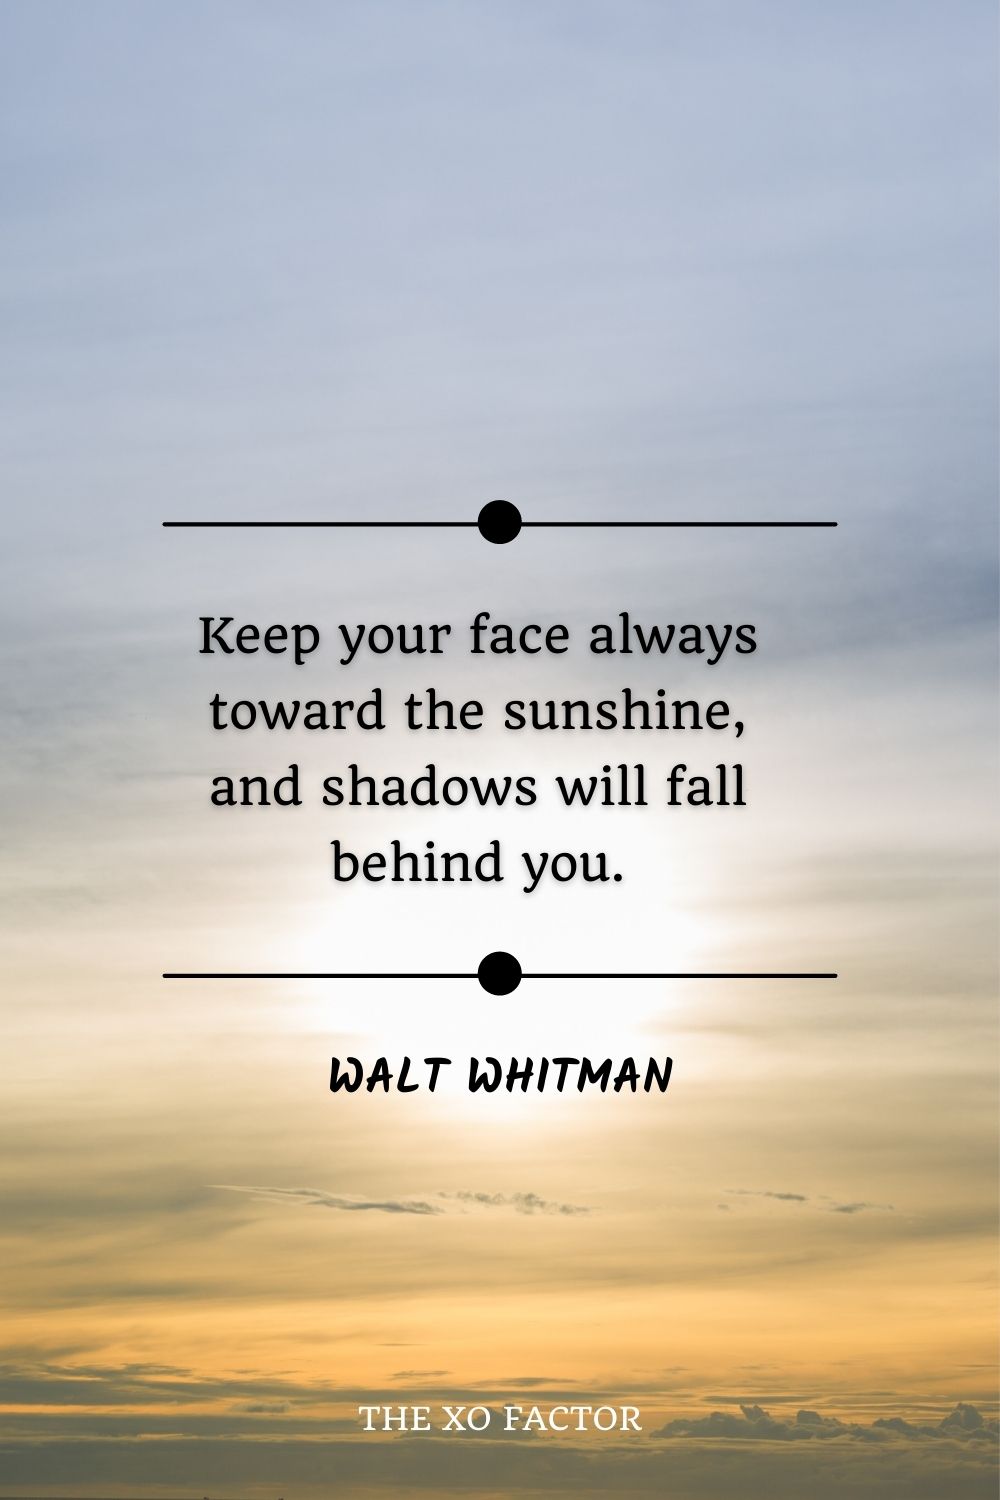 Keep your face always toward the sunshine, and shadows will fall behind you.” – Walt Whitman